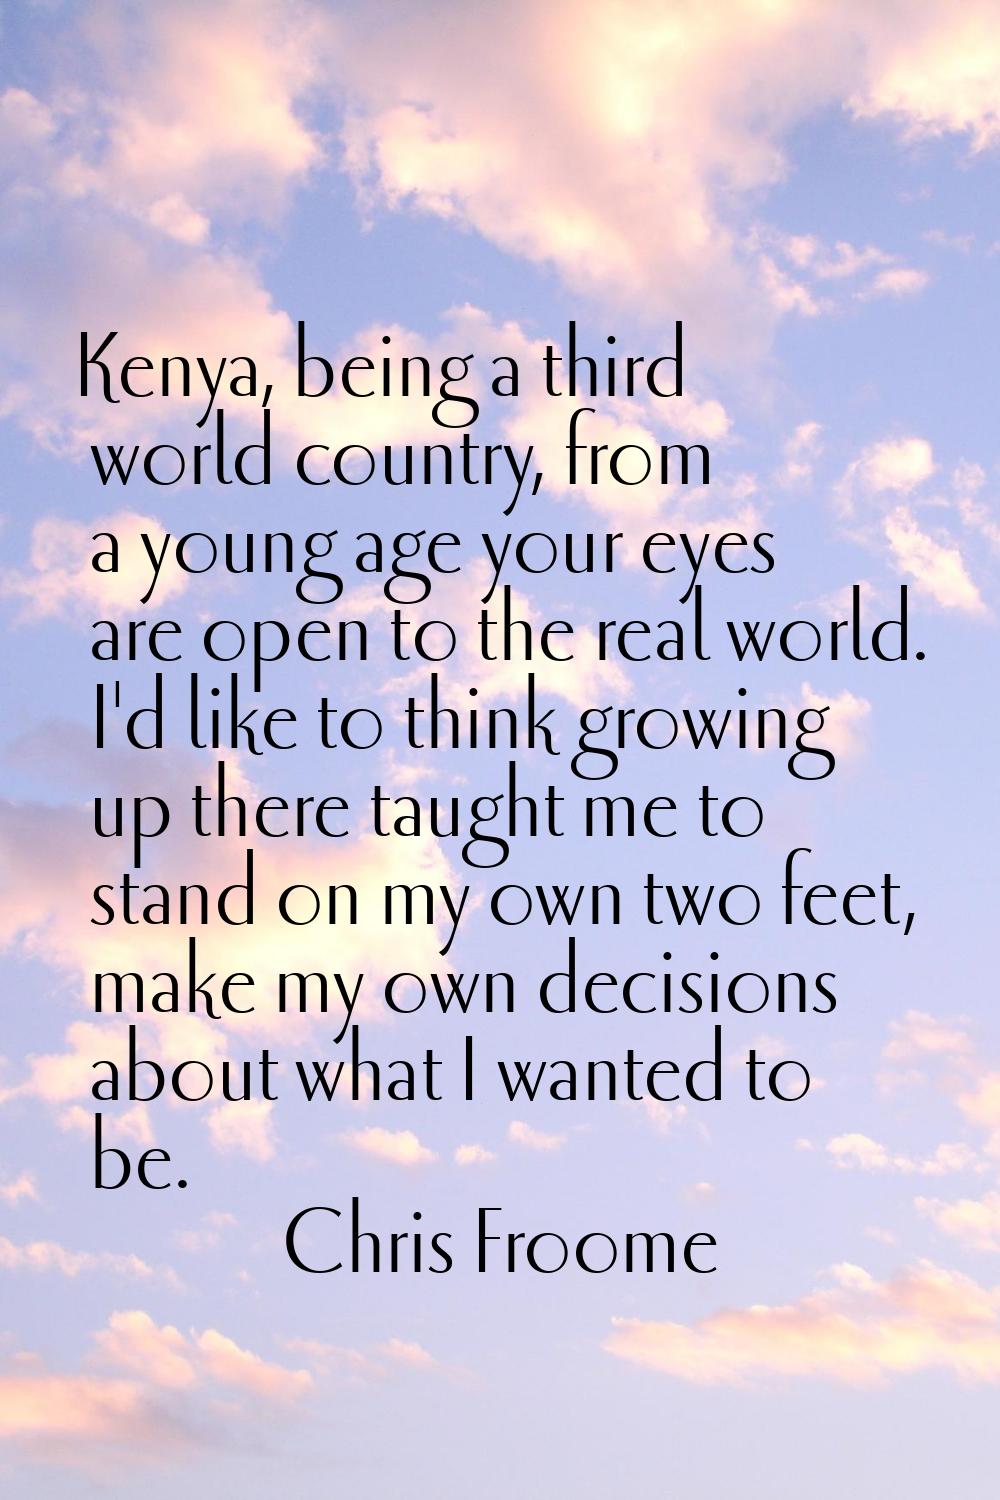 Kenya, being a third world country, from a young age your eyes are open to the real world. I'd like